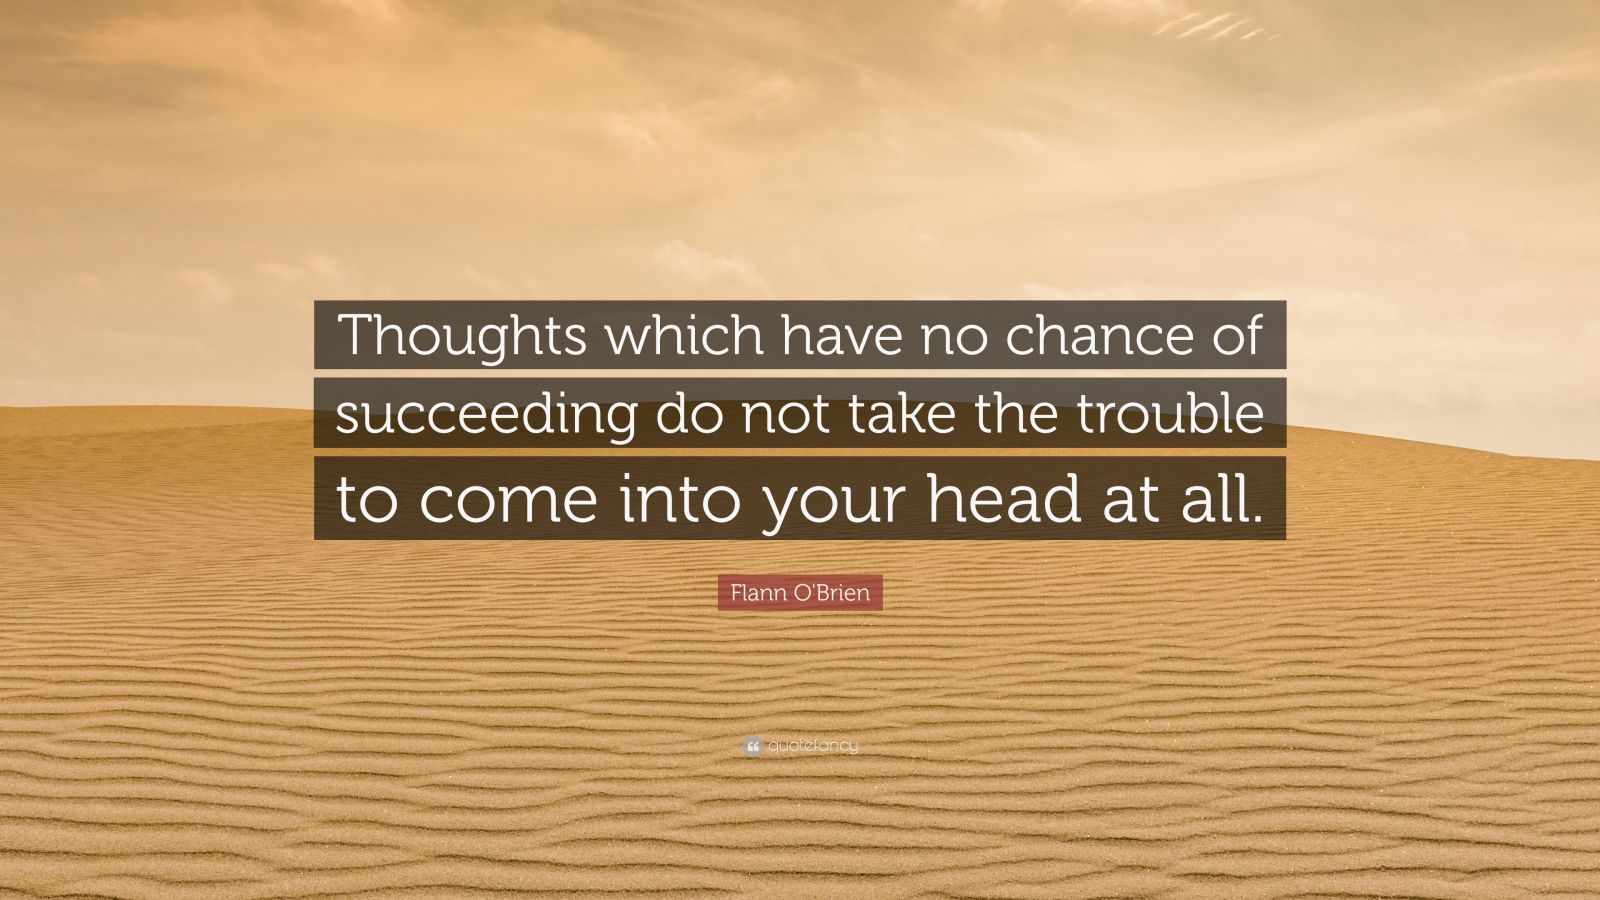 Flann O'Brien Quote: “Thoughts which have no chance of succeeding do ...